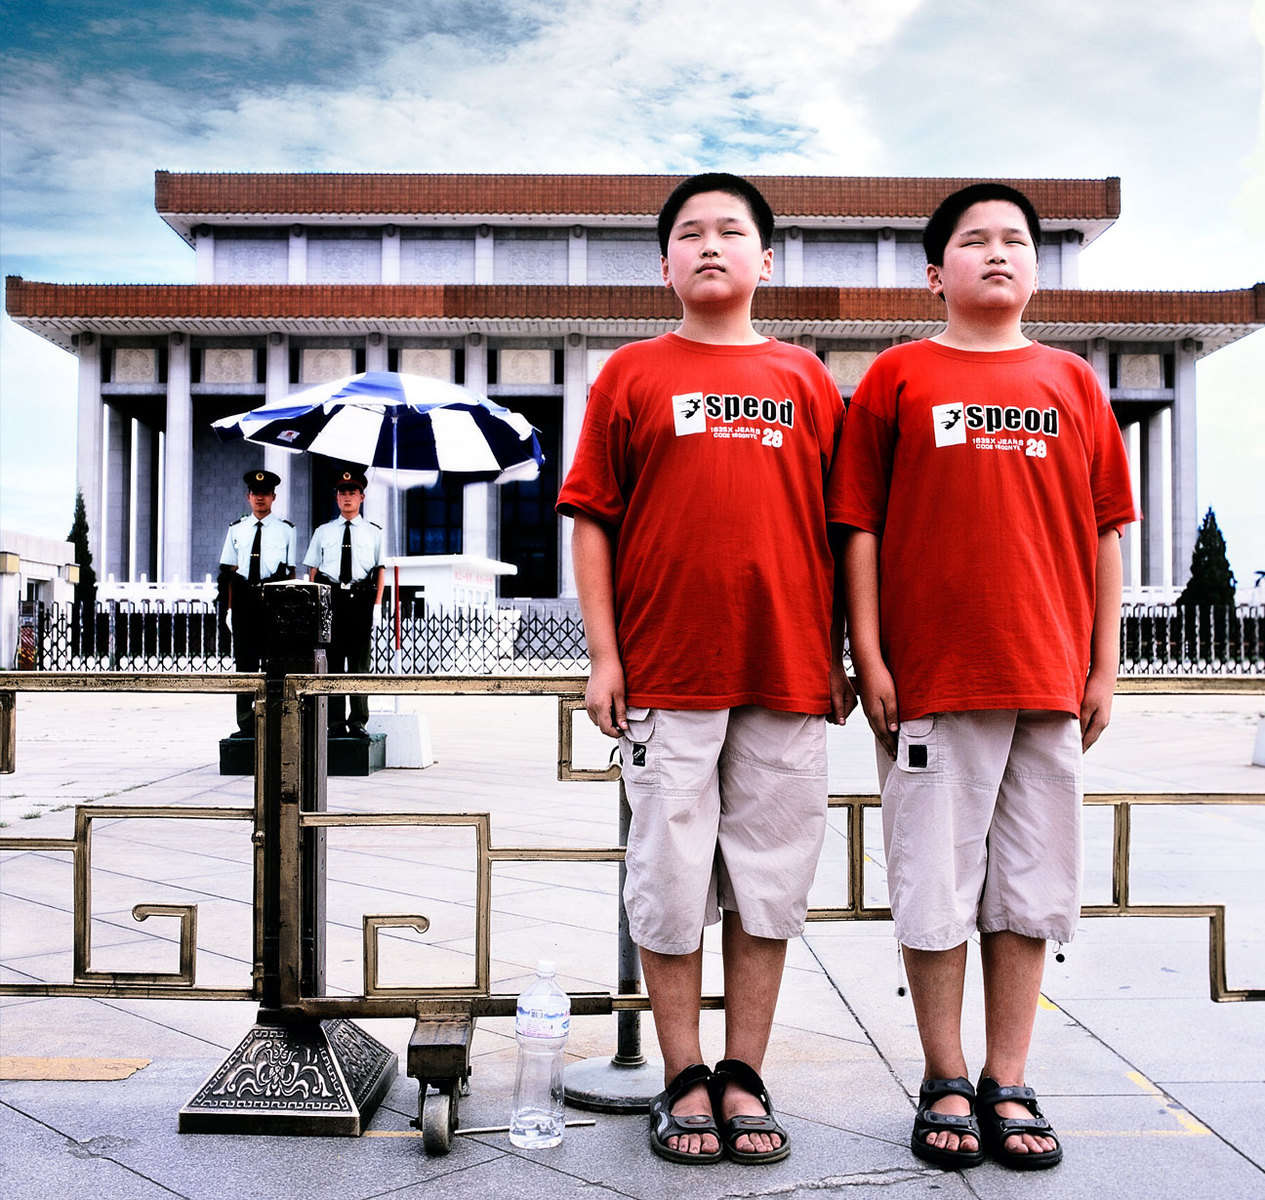 Contemporary China Tiananmen Square  : On The Road : New York City based photographer and video specializing in portrait corporate portraits, video, editorial stories for on location and architectural photography